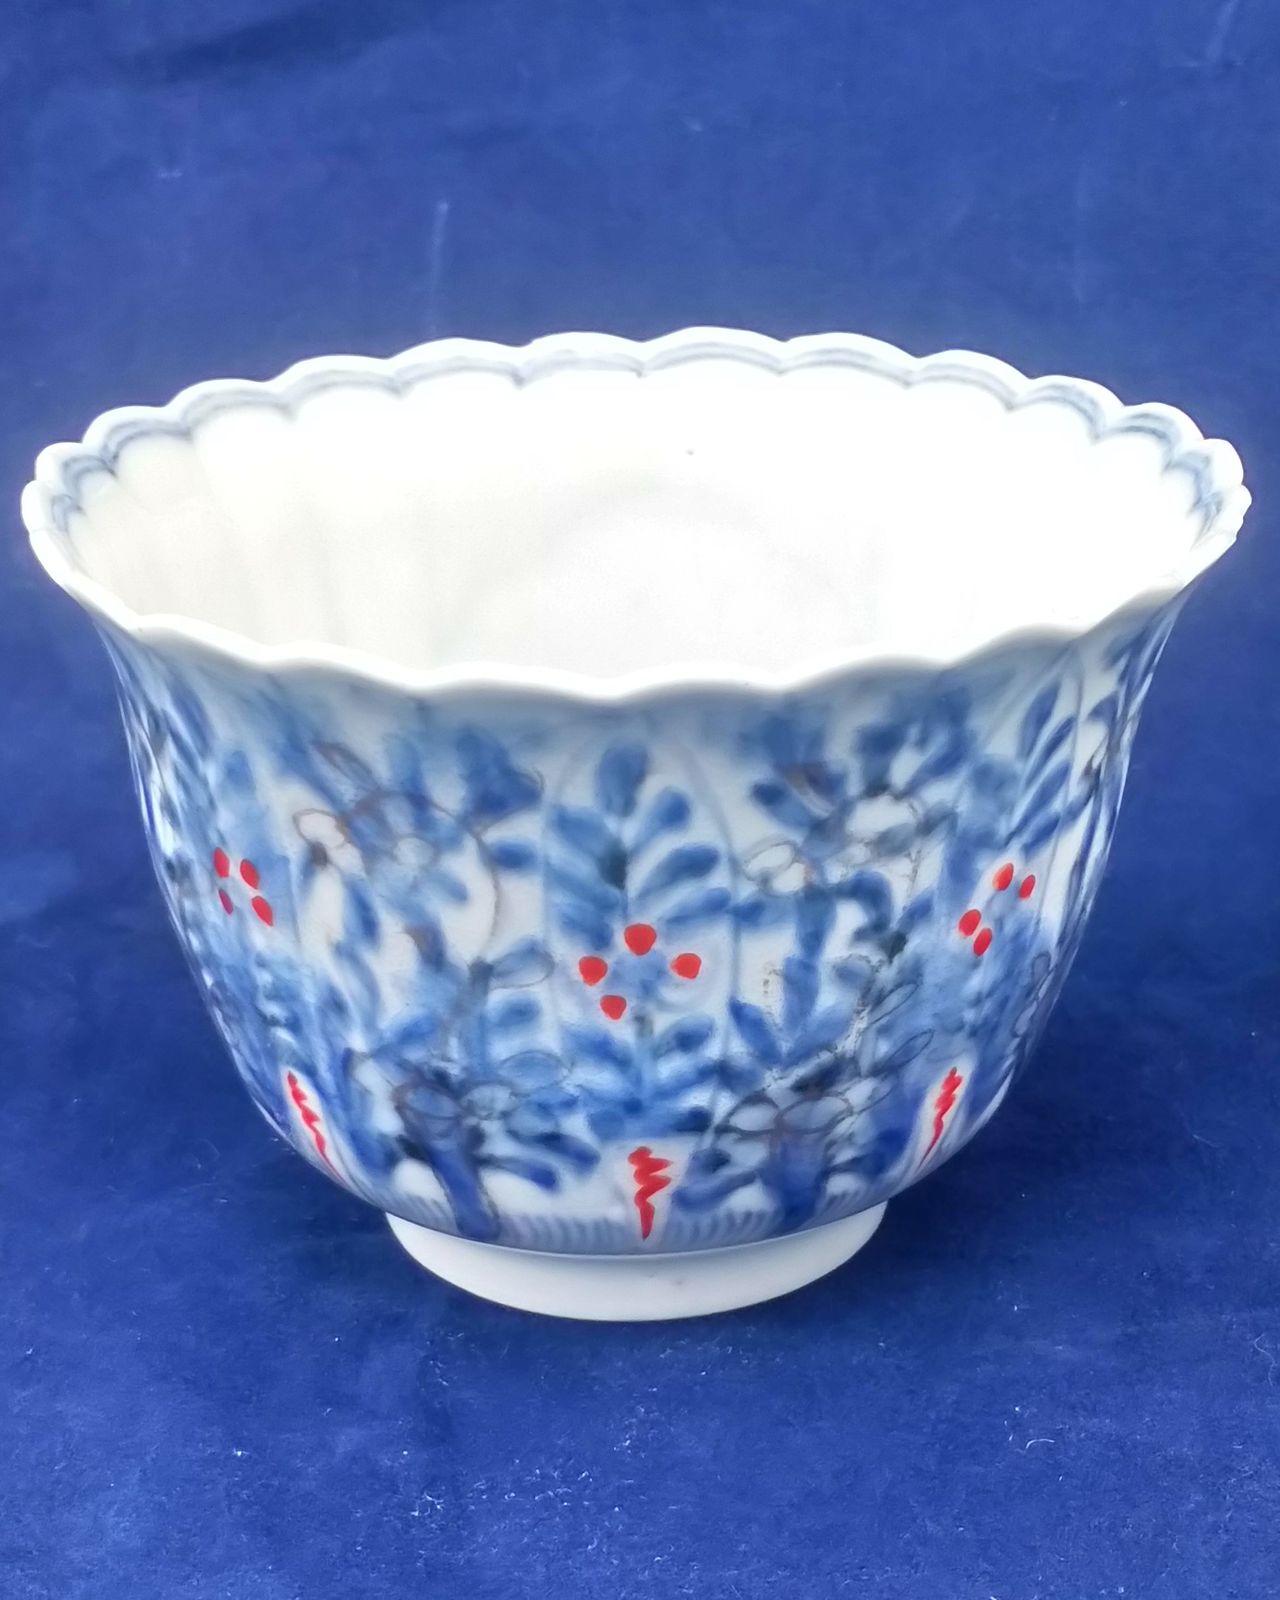 An antique Japanese Hirado porcelain tea bowl or sake cup decorated in under glaze blue and overglaze enamel and gilding with a flowers and grasses pattern. The body is ribbed and the rim scalloped made in the late Edo period marked Zoshuntei Sanpo Zo circa 1860